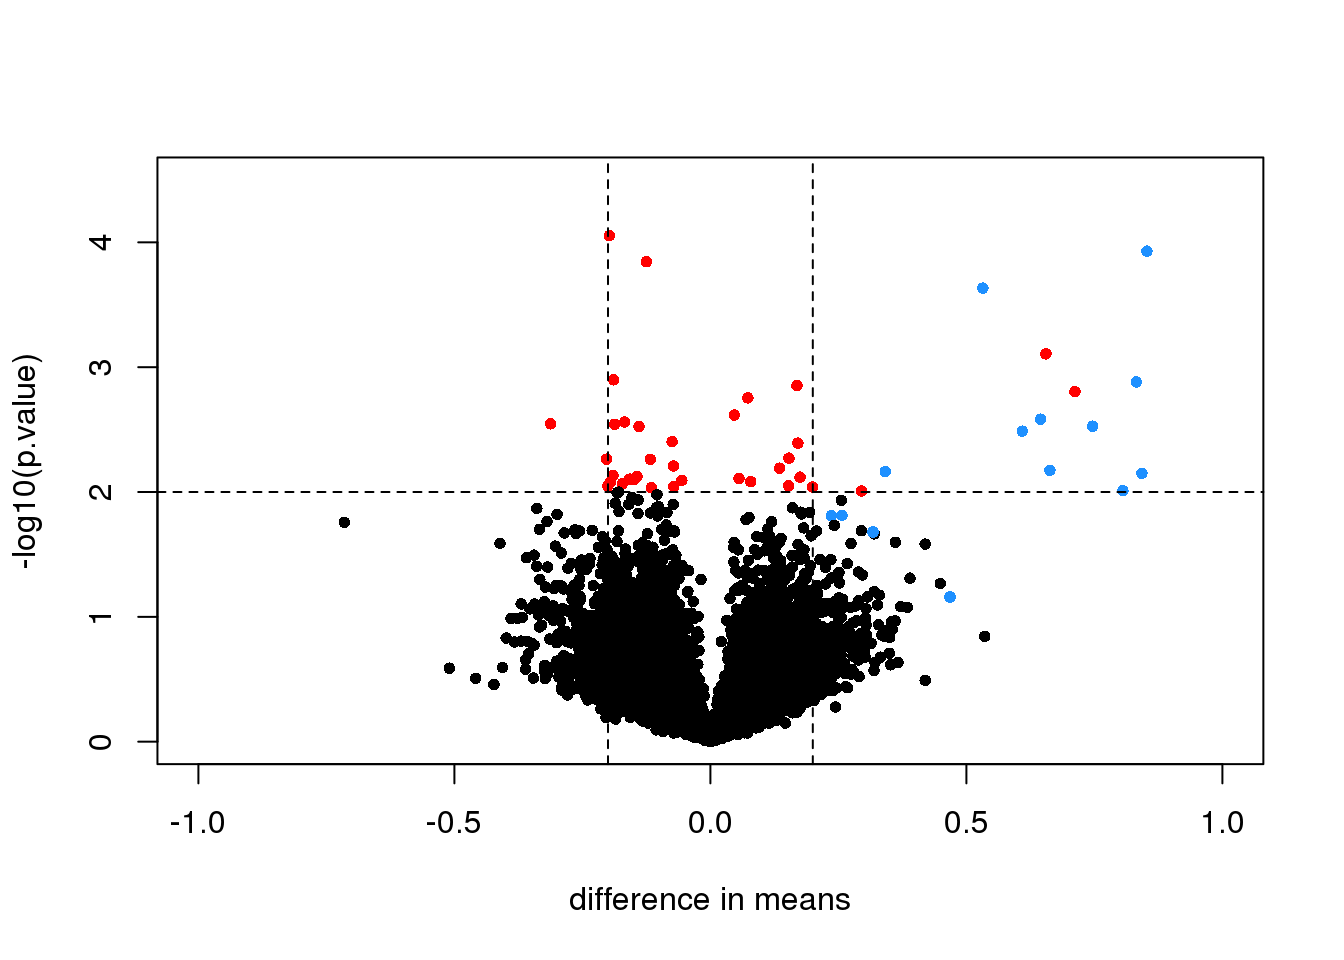 Volcano plot for t-test comparing two groups. Spiked-in genes are denoted with blue. Among the rest of the genes, those with p-value < 0.01 are denoted with red.